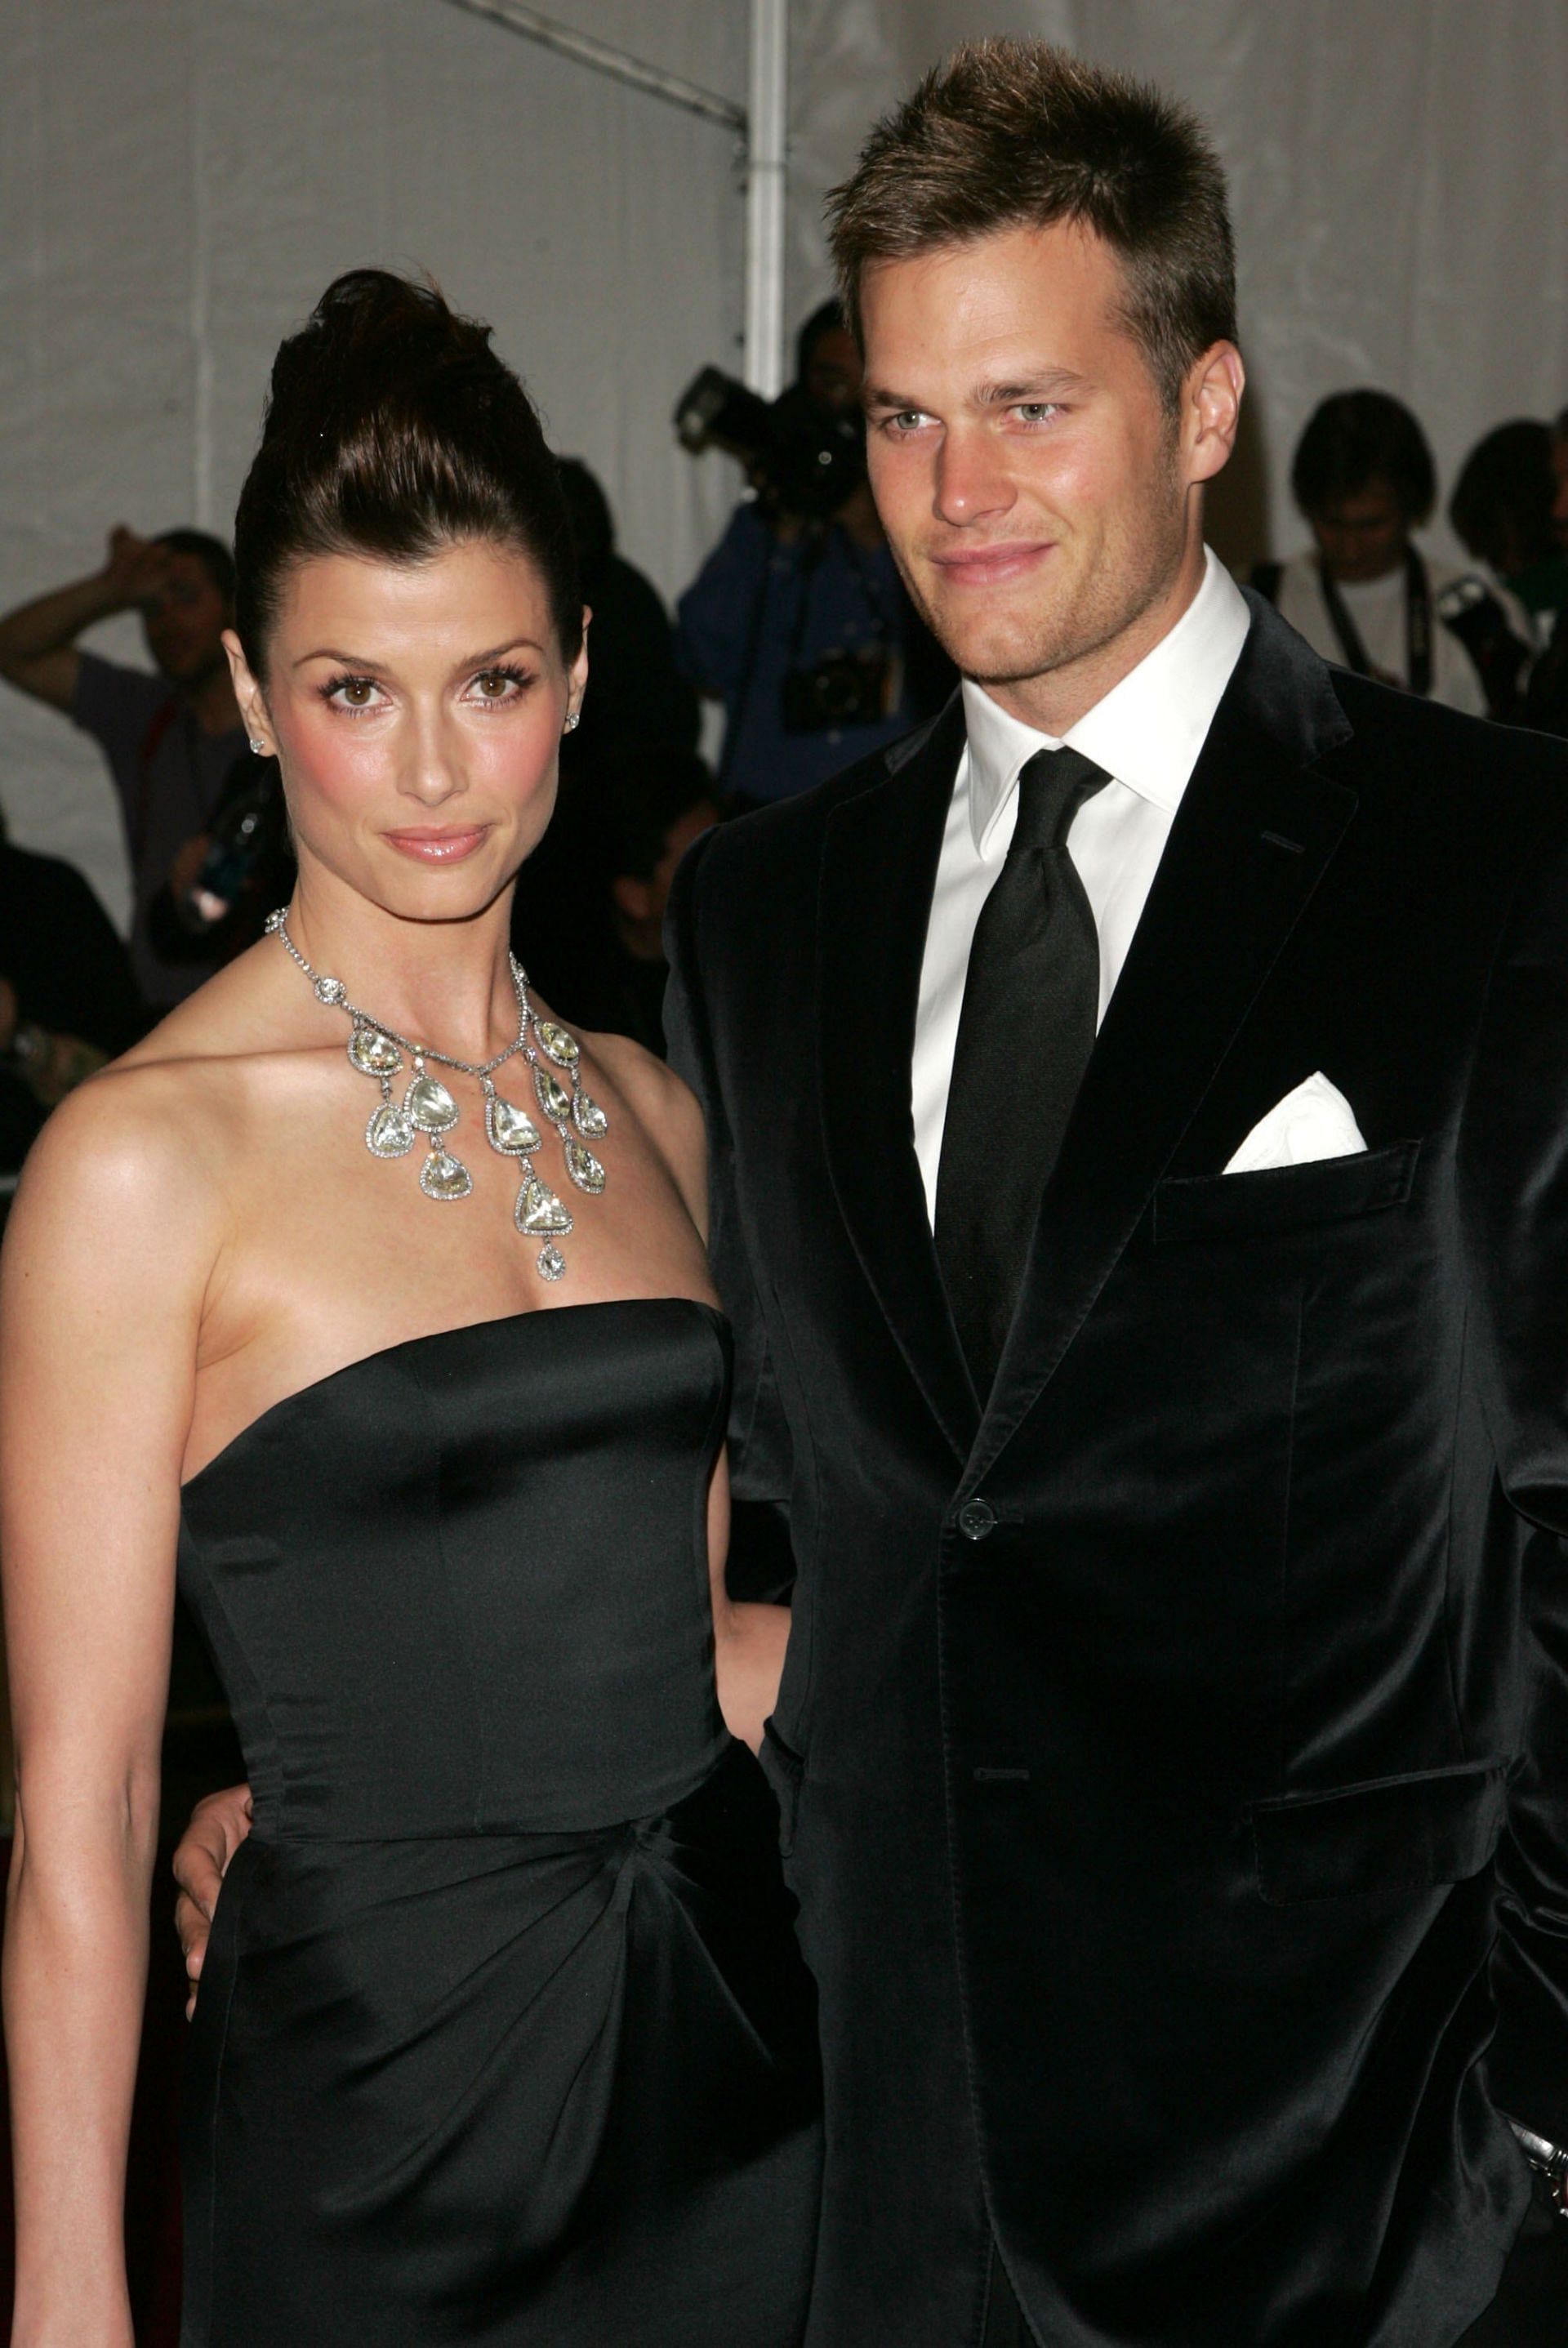 Tom Brady's dating history: His girlfriends before Gisele